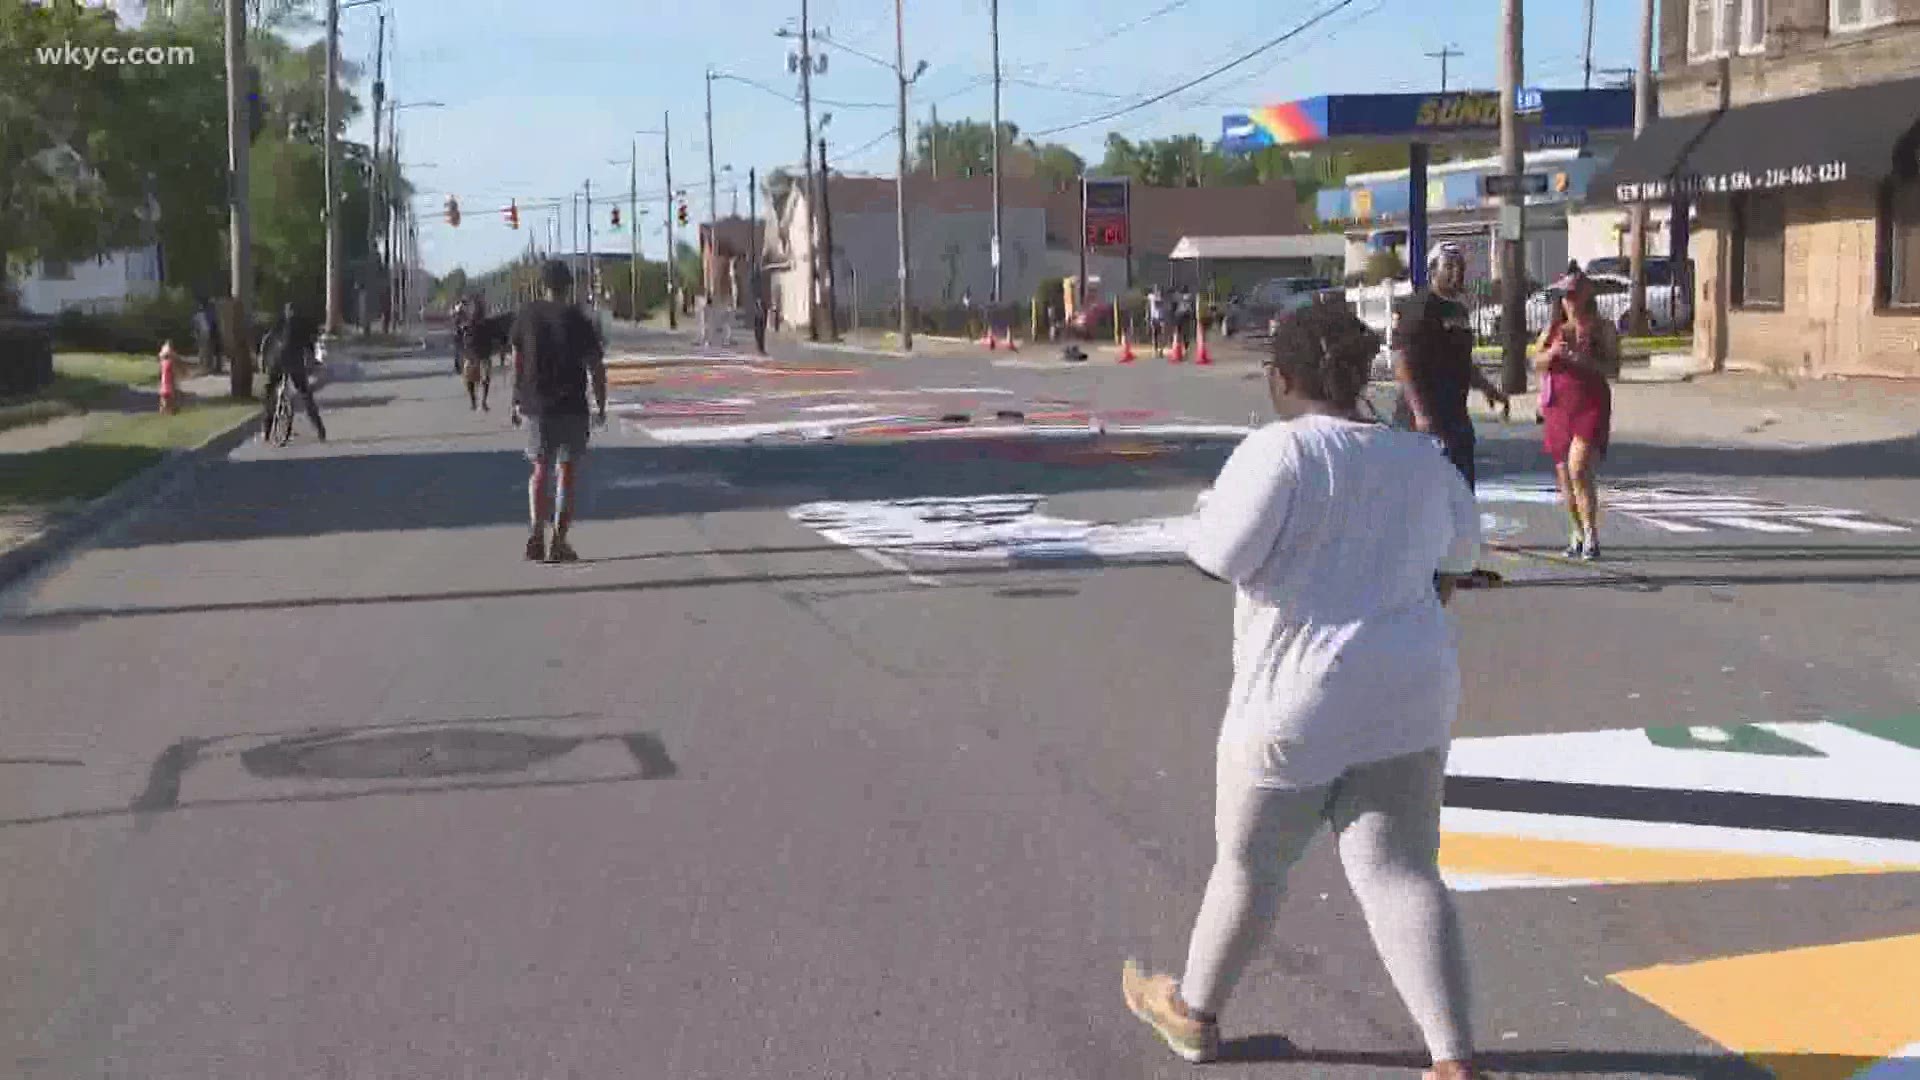 Bold new art has made its way into Cleveland. Cleveland is one of the many cities across the U.S. to paint the Black Lives Matter message on its streets.